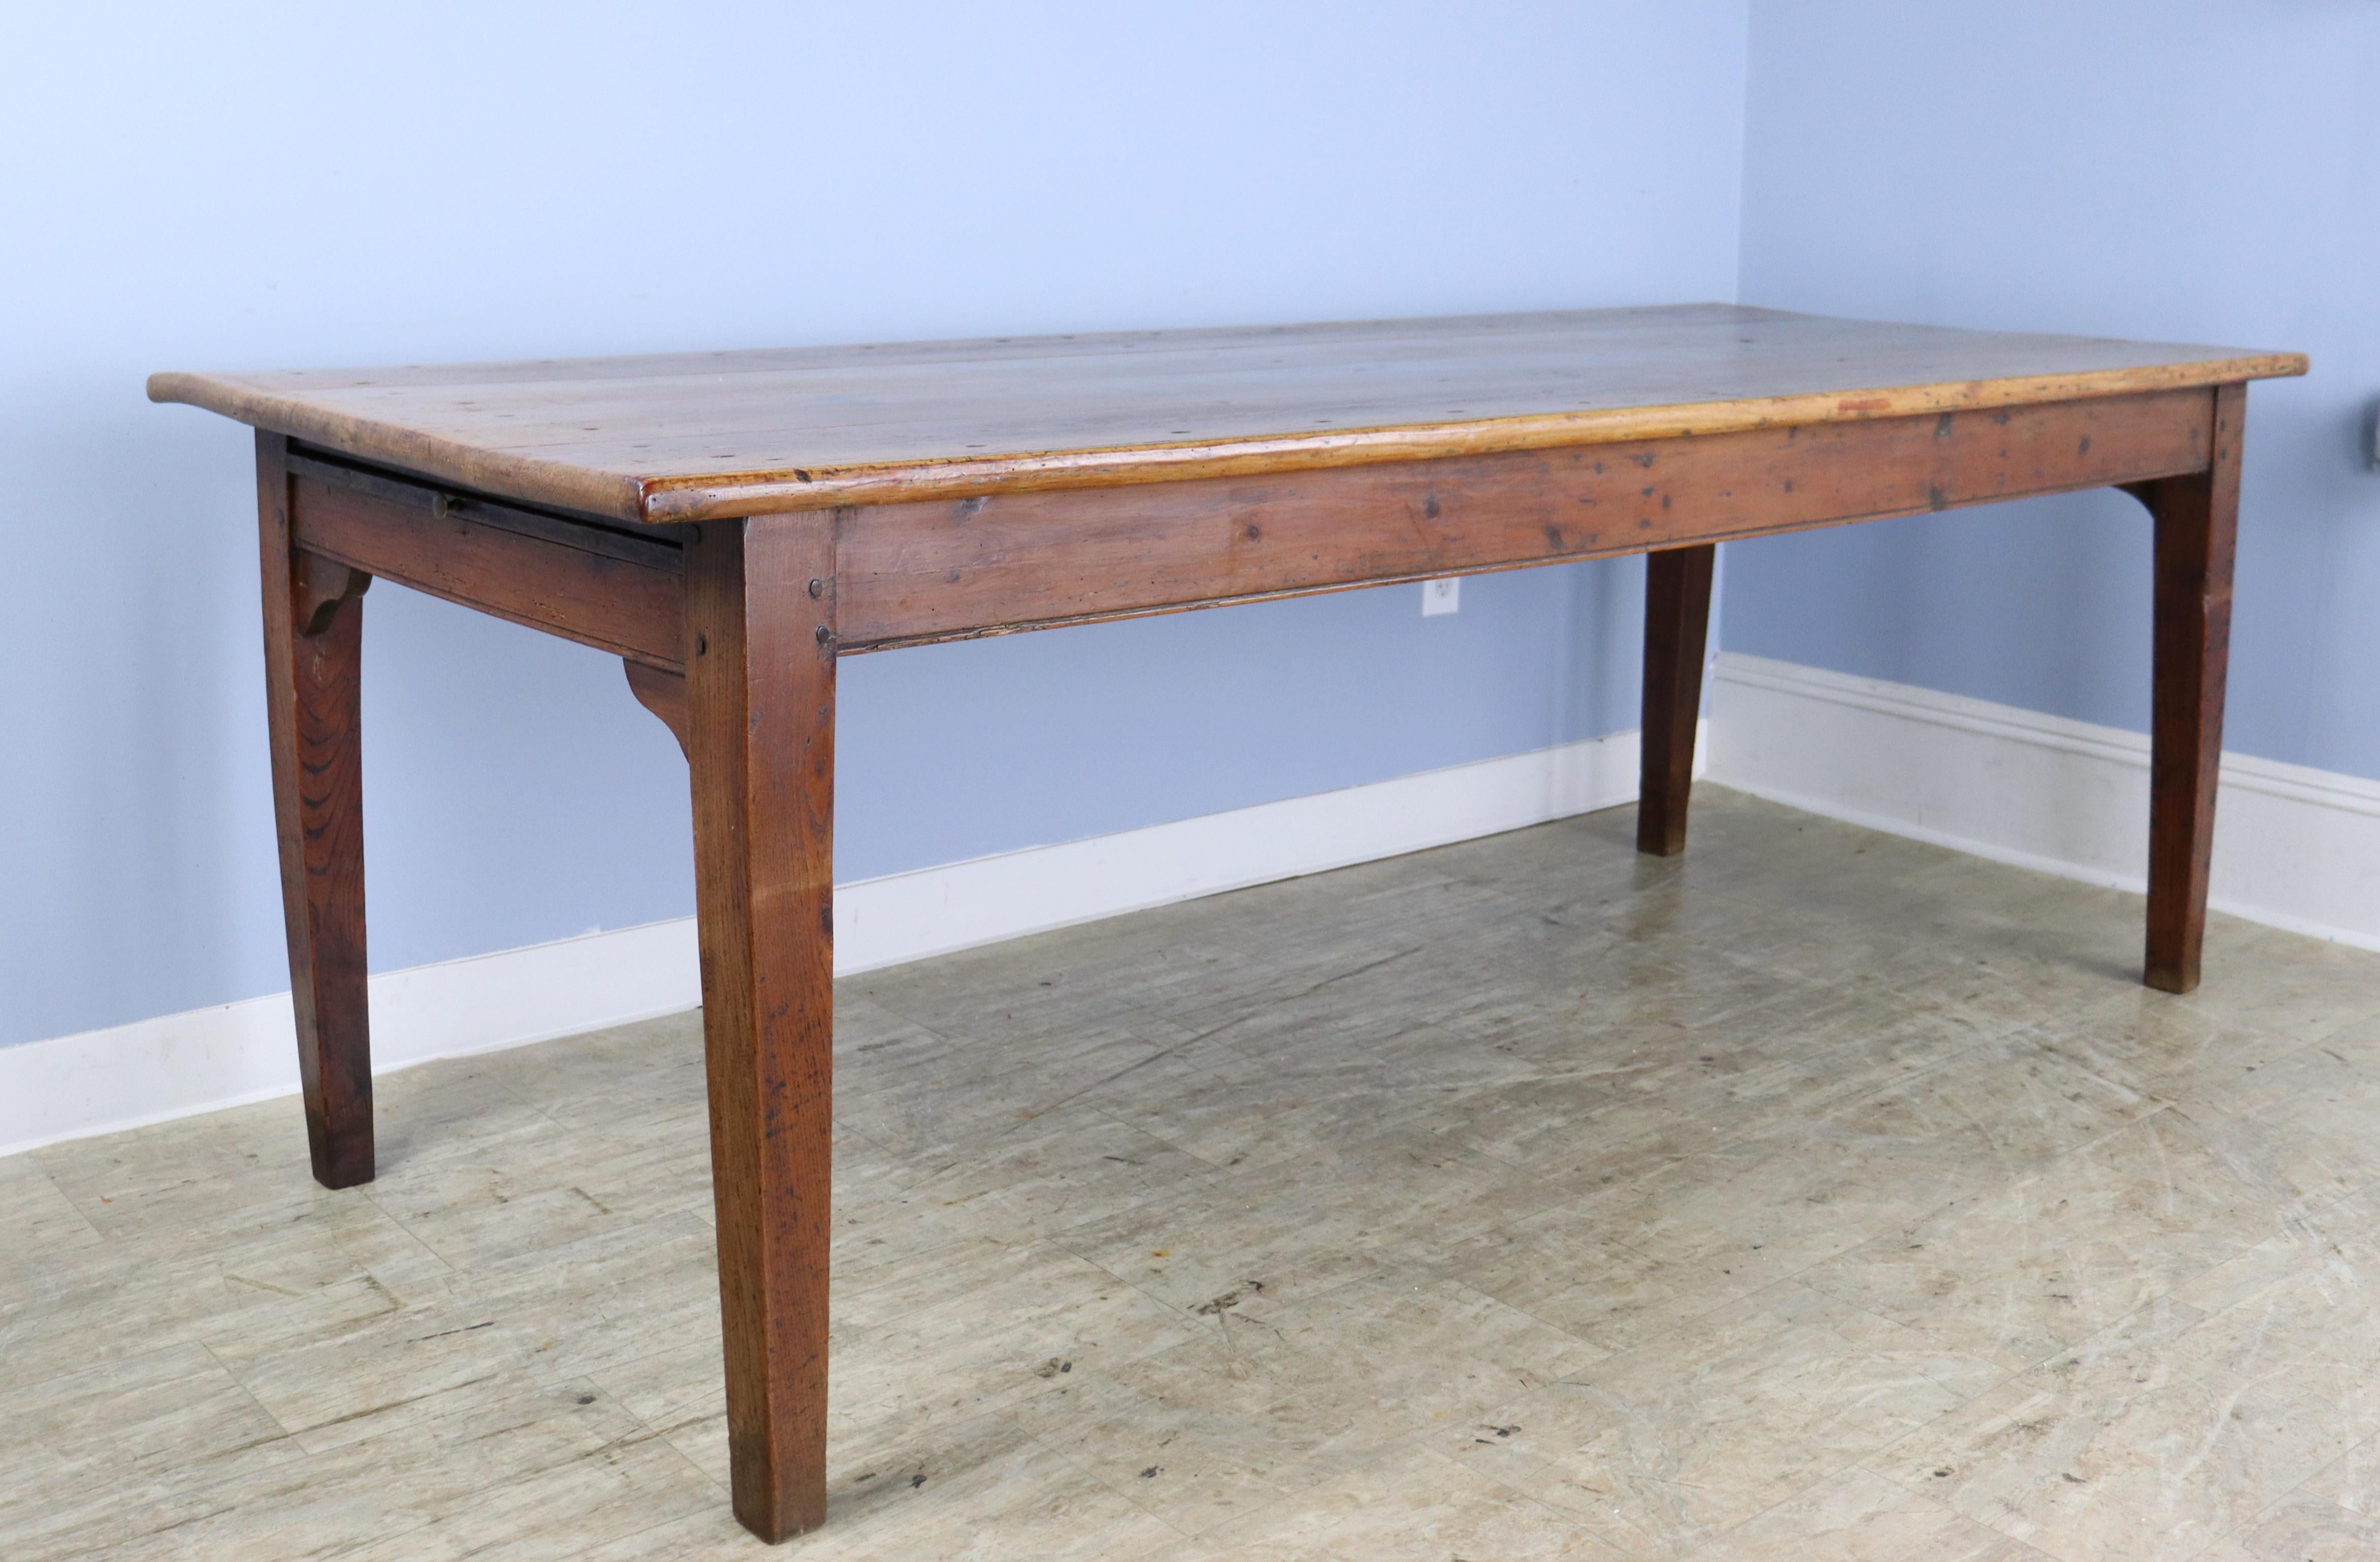 A long rustic pine farm table with glorious pine grain and interesting exposed nailheads.  The breadslide, shown, is sturdy enough for platters or additional diners.  The color and patina on this piece are really good. With 74.5 inches between the